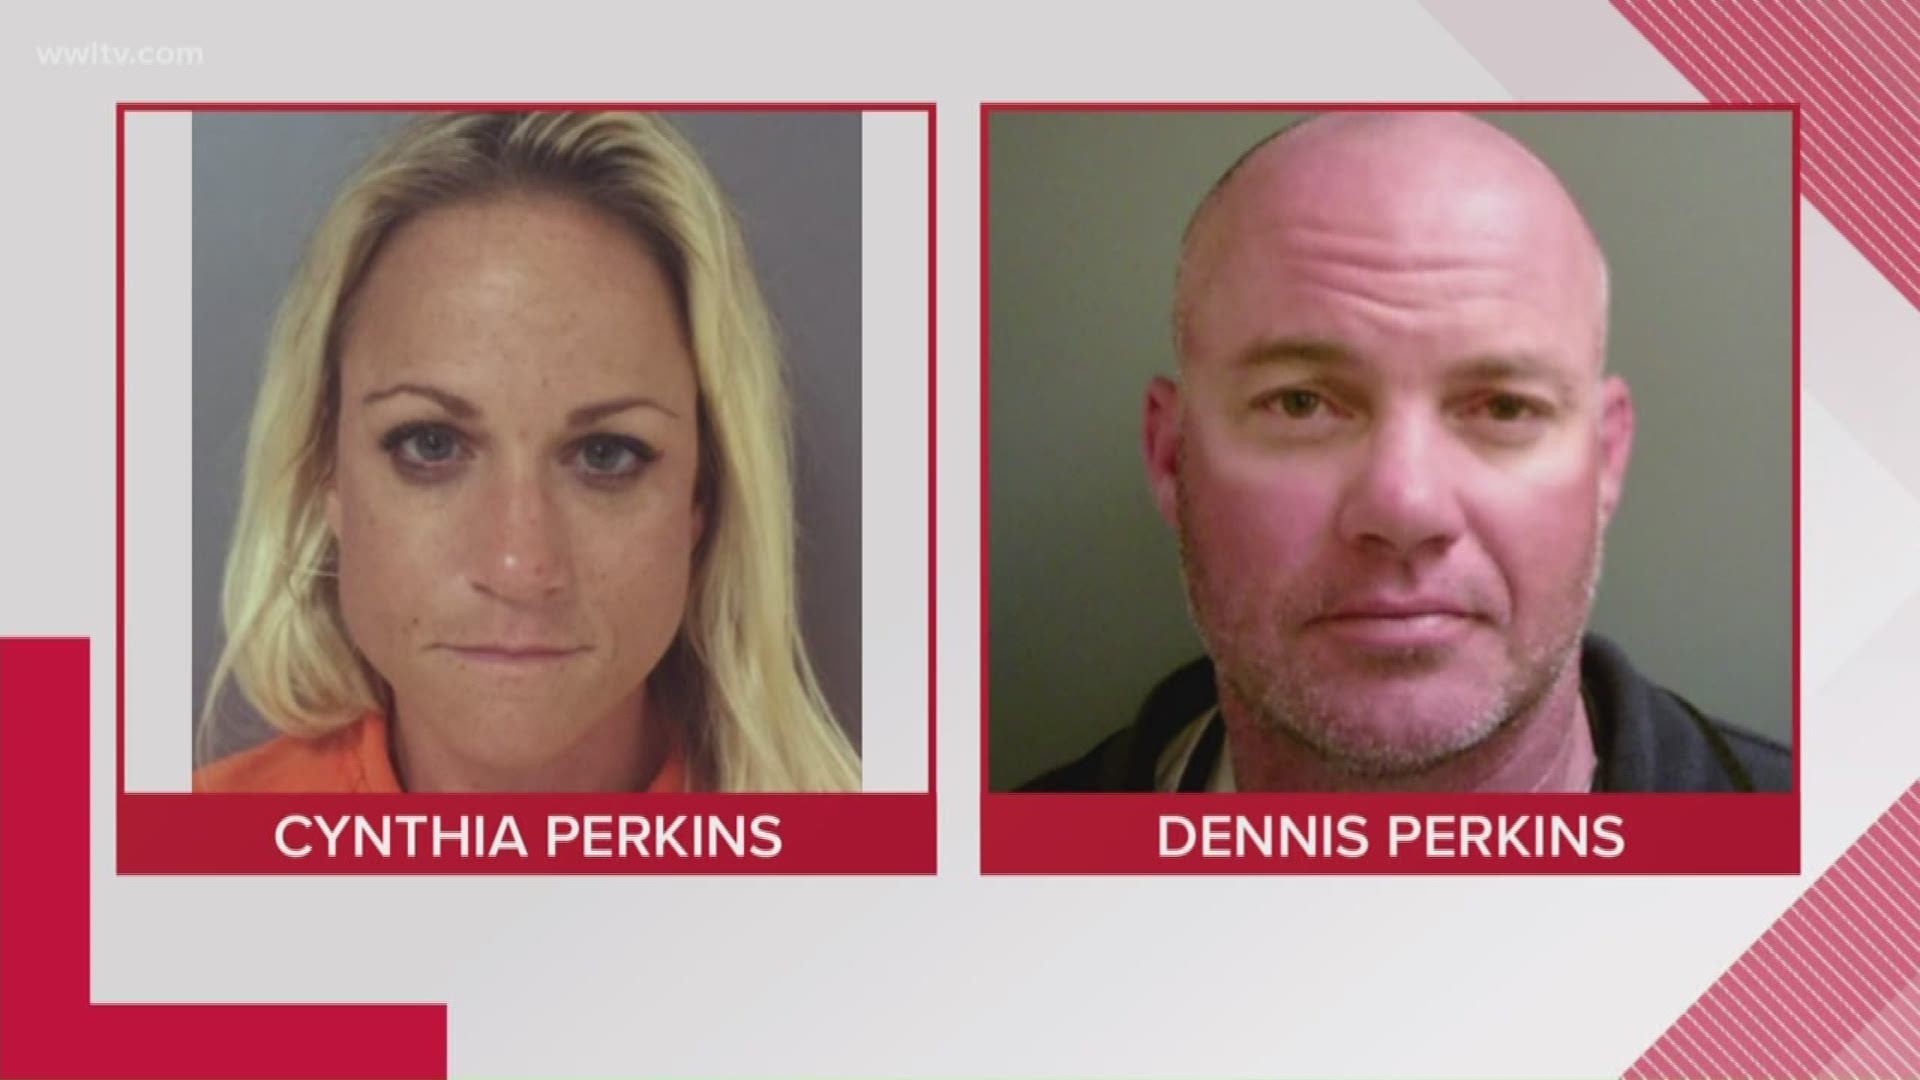 Dennis Perkins and Cynthia Perkins were indicted on more than 100 charges including child porn, rape, attempted rape, sexual battery and video voyeurism.